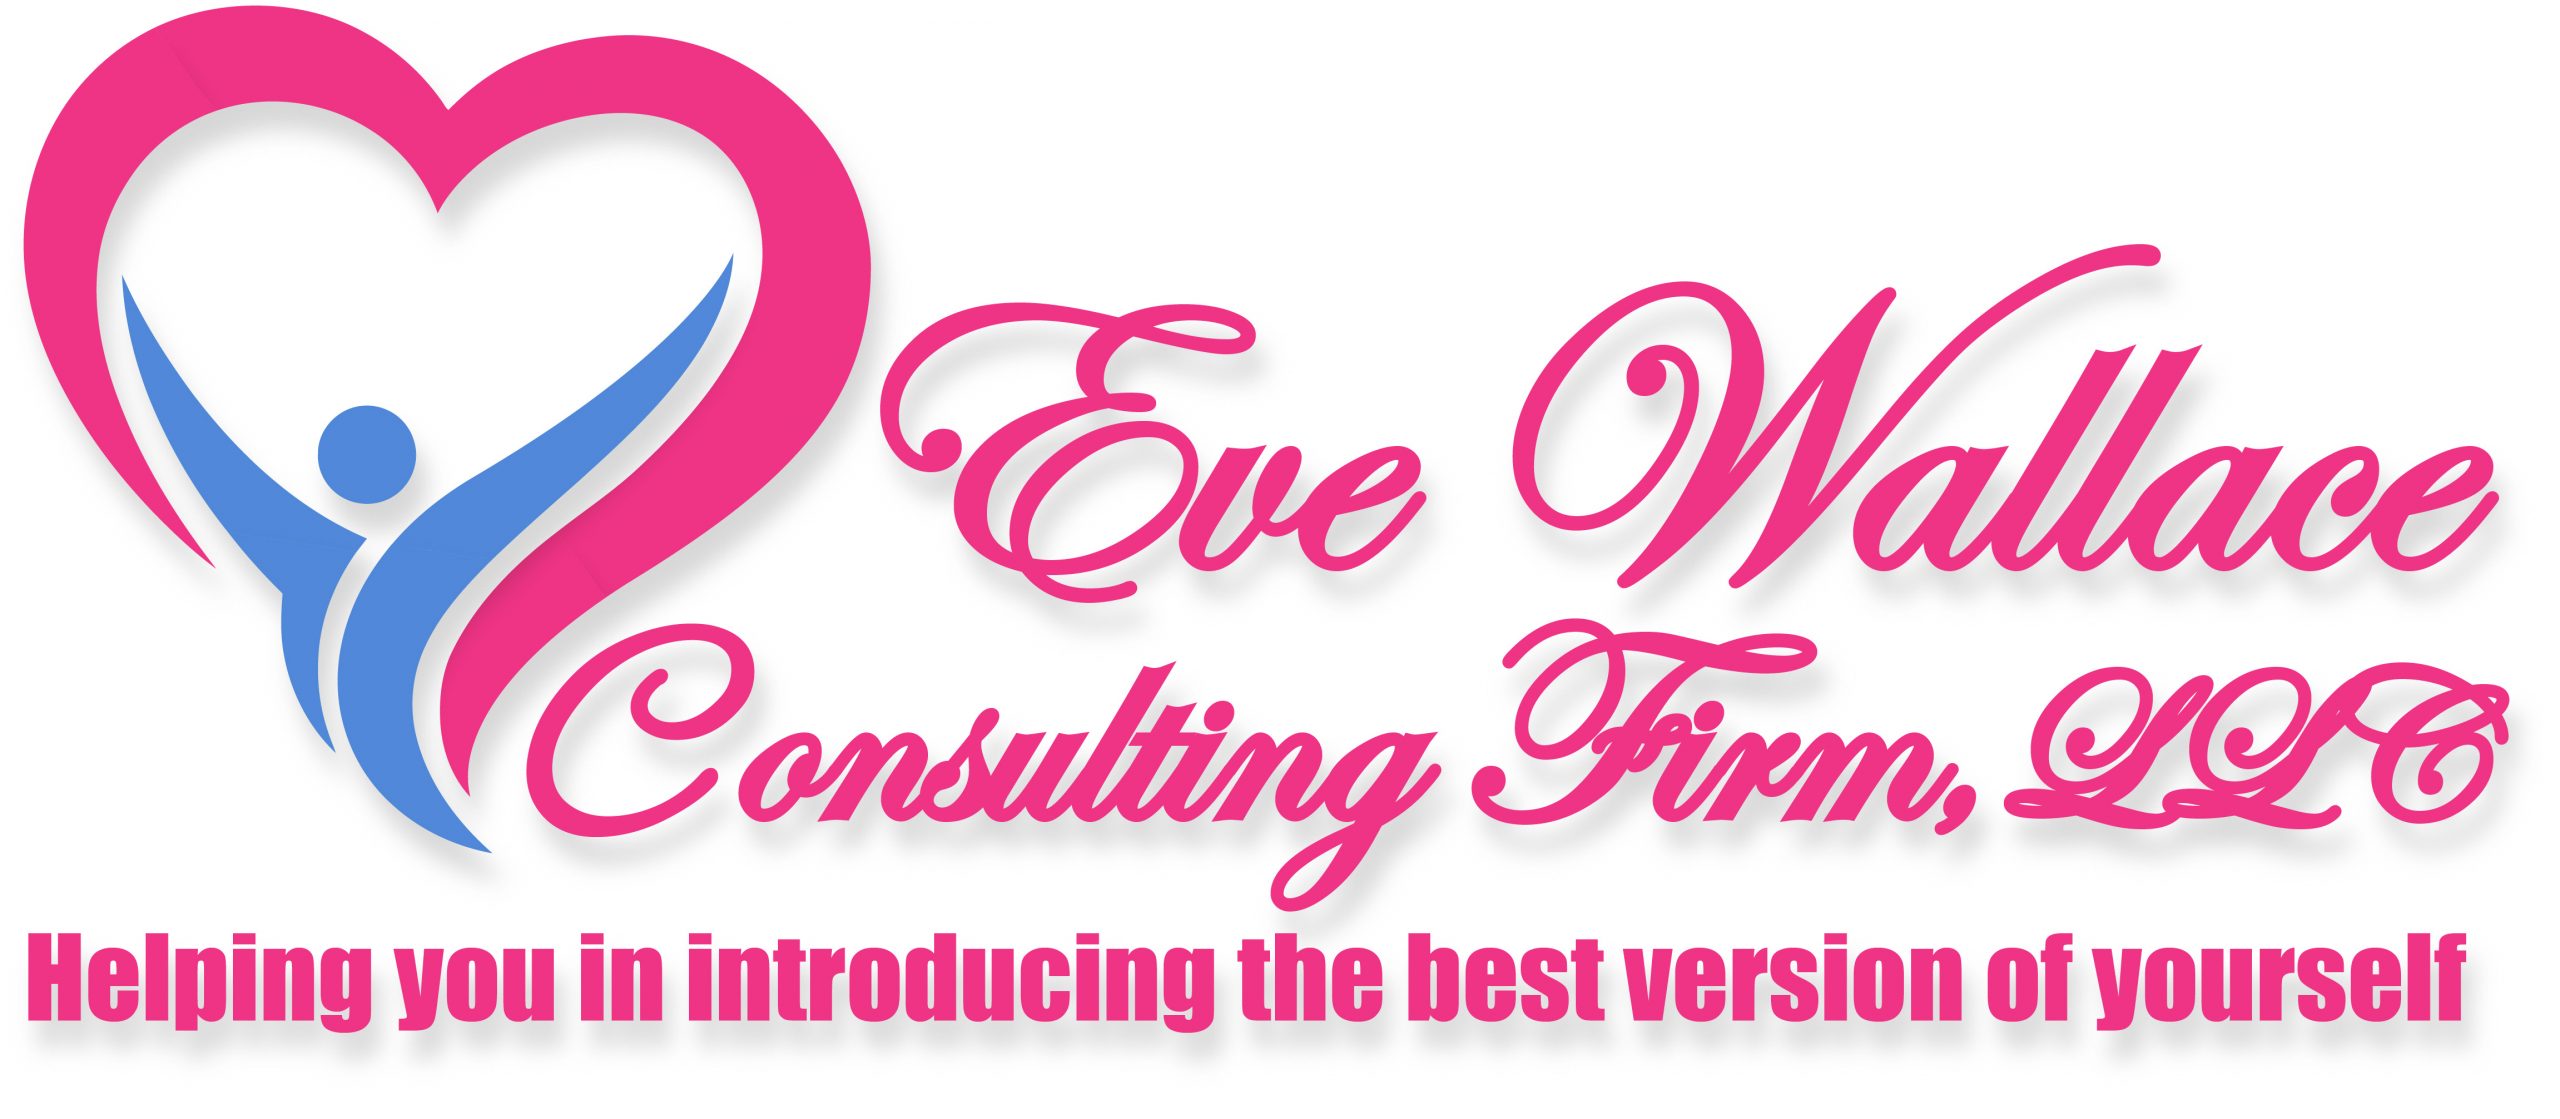 evewallaceconsulting.com